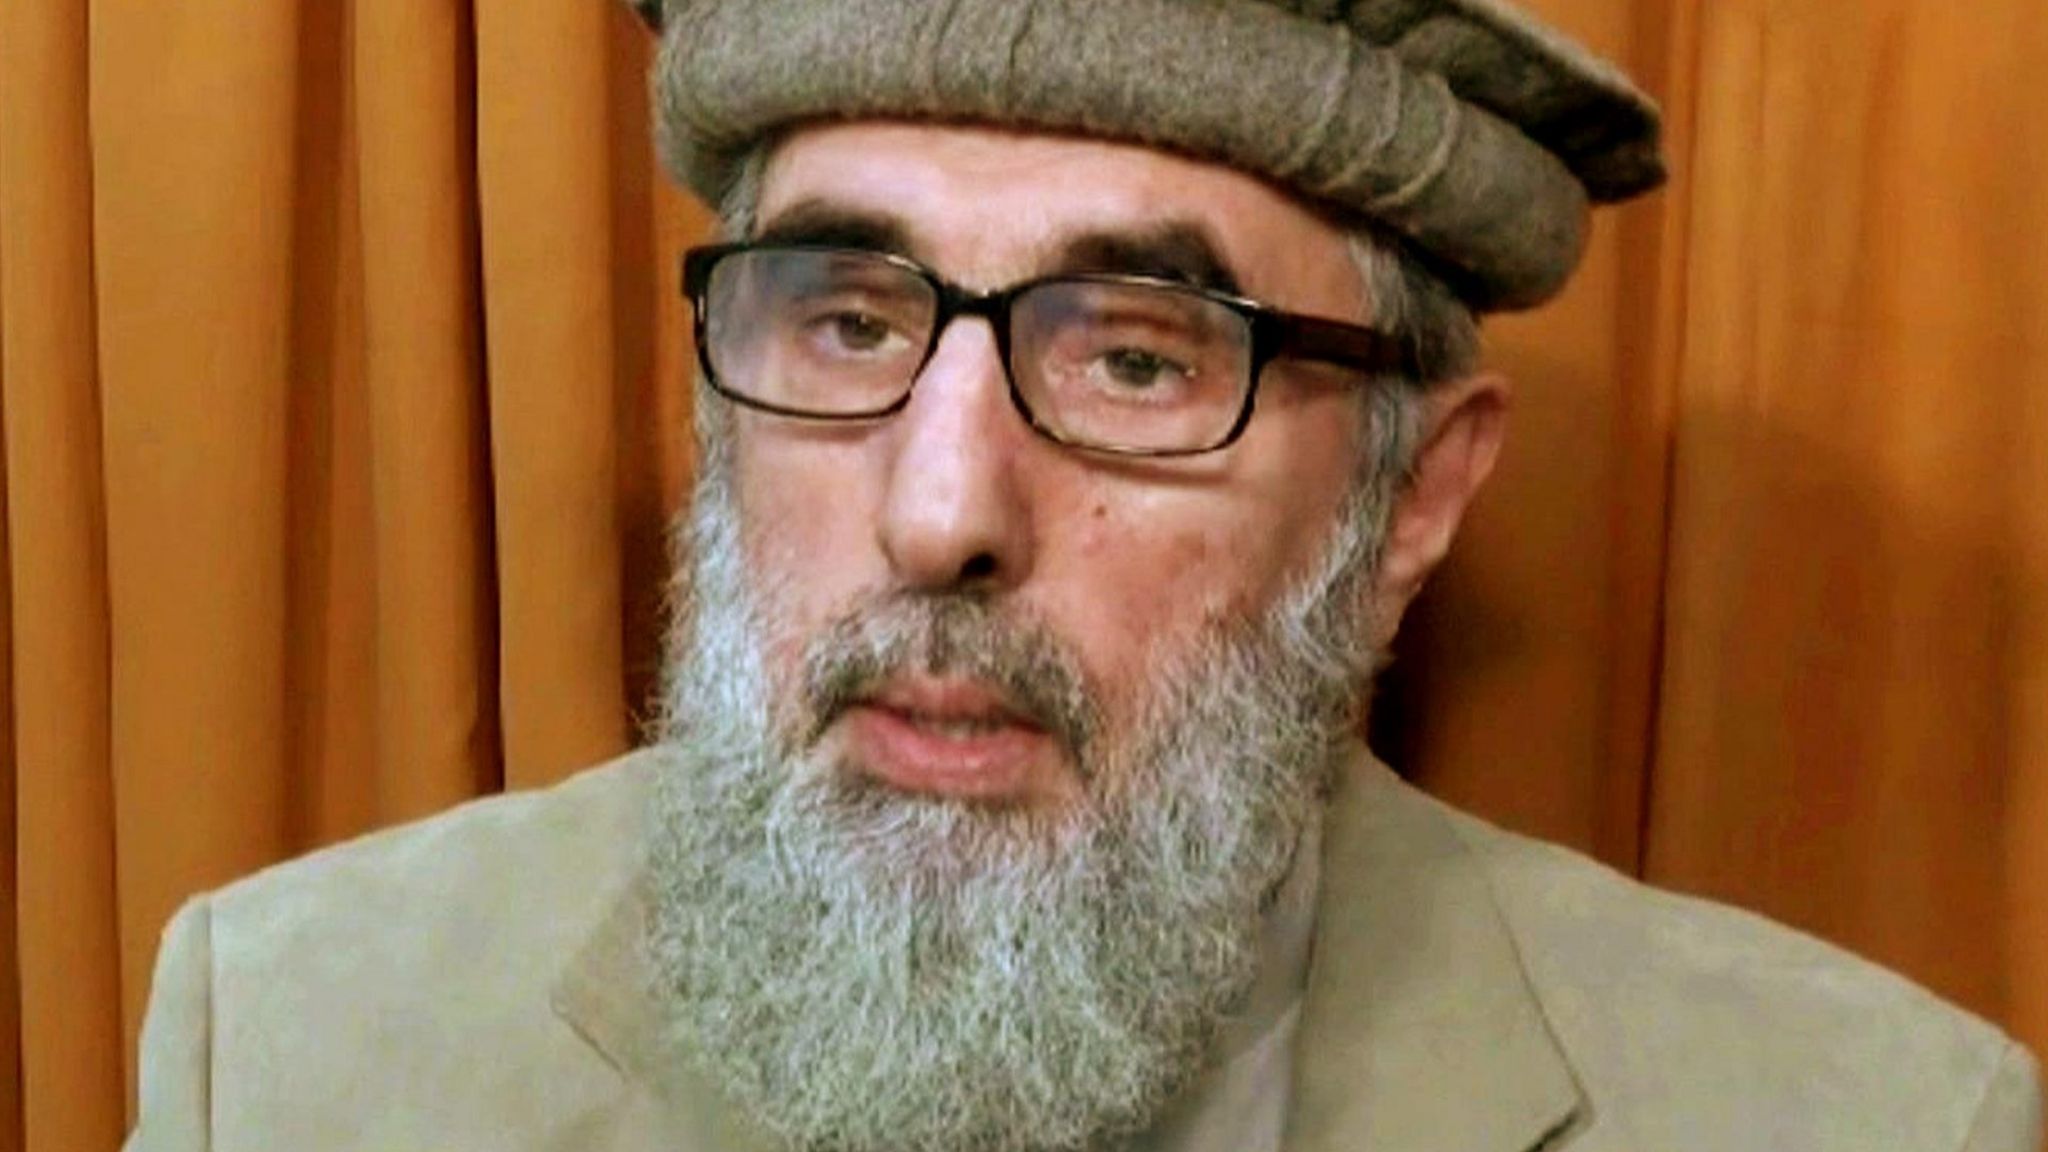 Still from video released to AP in November 2015 shows Afghan warlord Gulbuddin Hekmatyar, now in his late 60s, in an undisclosed location.